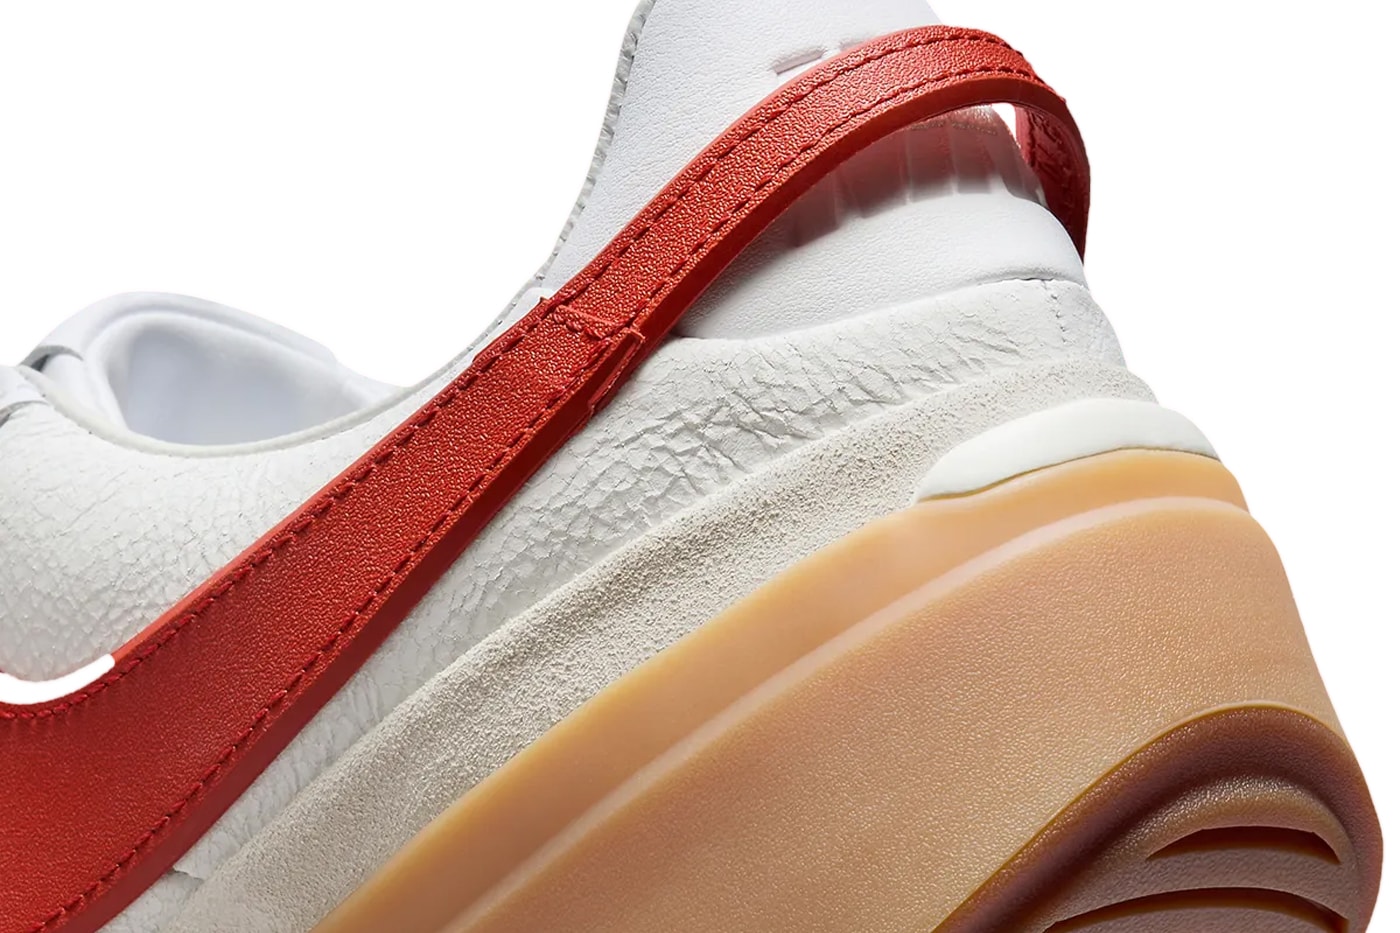 Official Look Nike Blazer Phantom Low in "White/Red" FN5820-100 goddess of victory low-top shoes hangtag sneakers